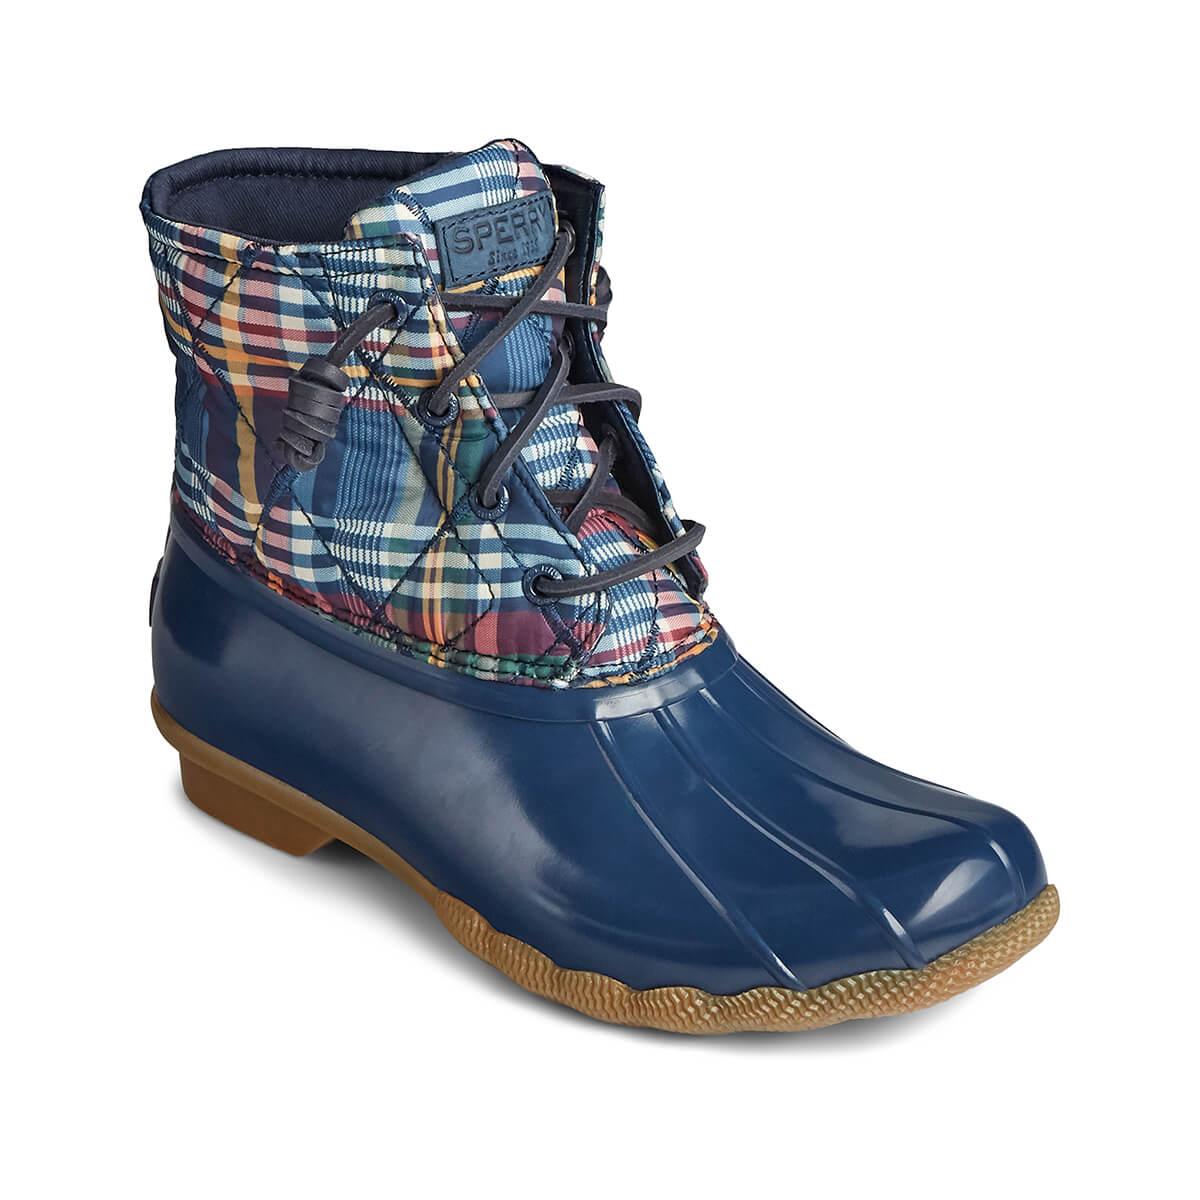 sperry nylon quilted duck boot